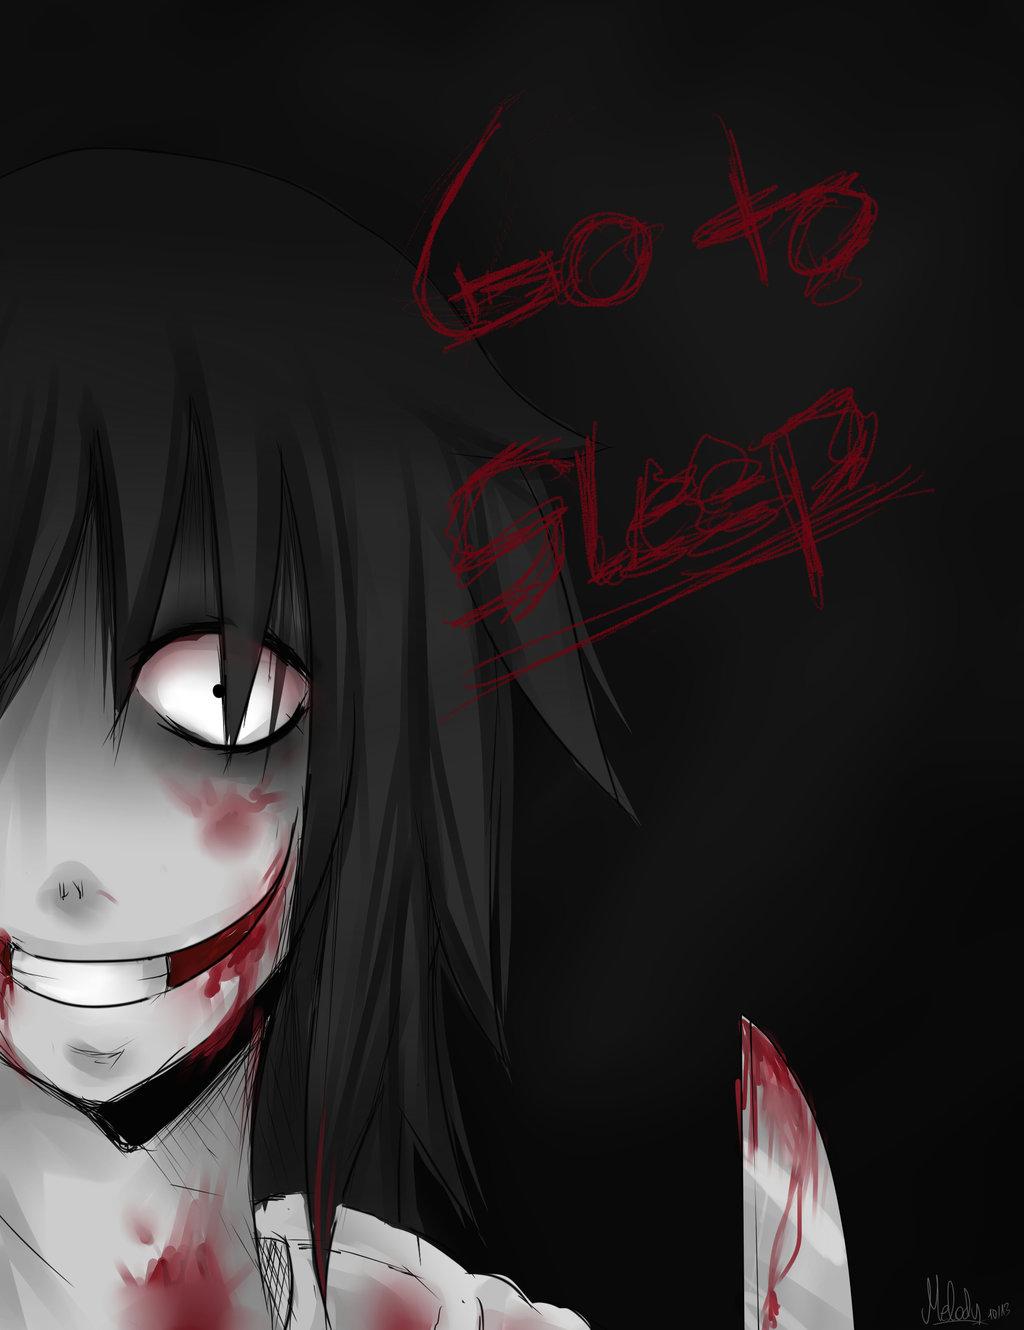 Awesome Jeff The Killer Wallpaper. Jeff